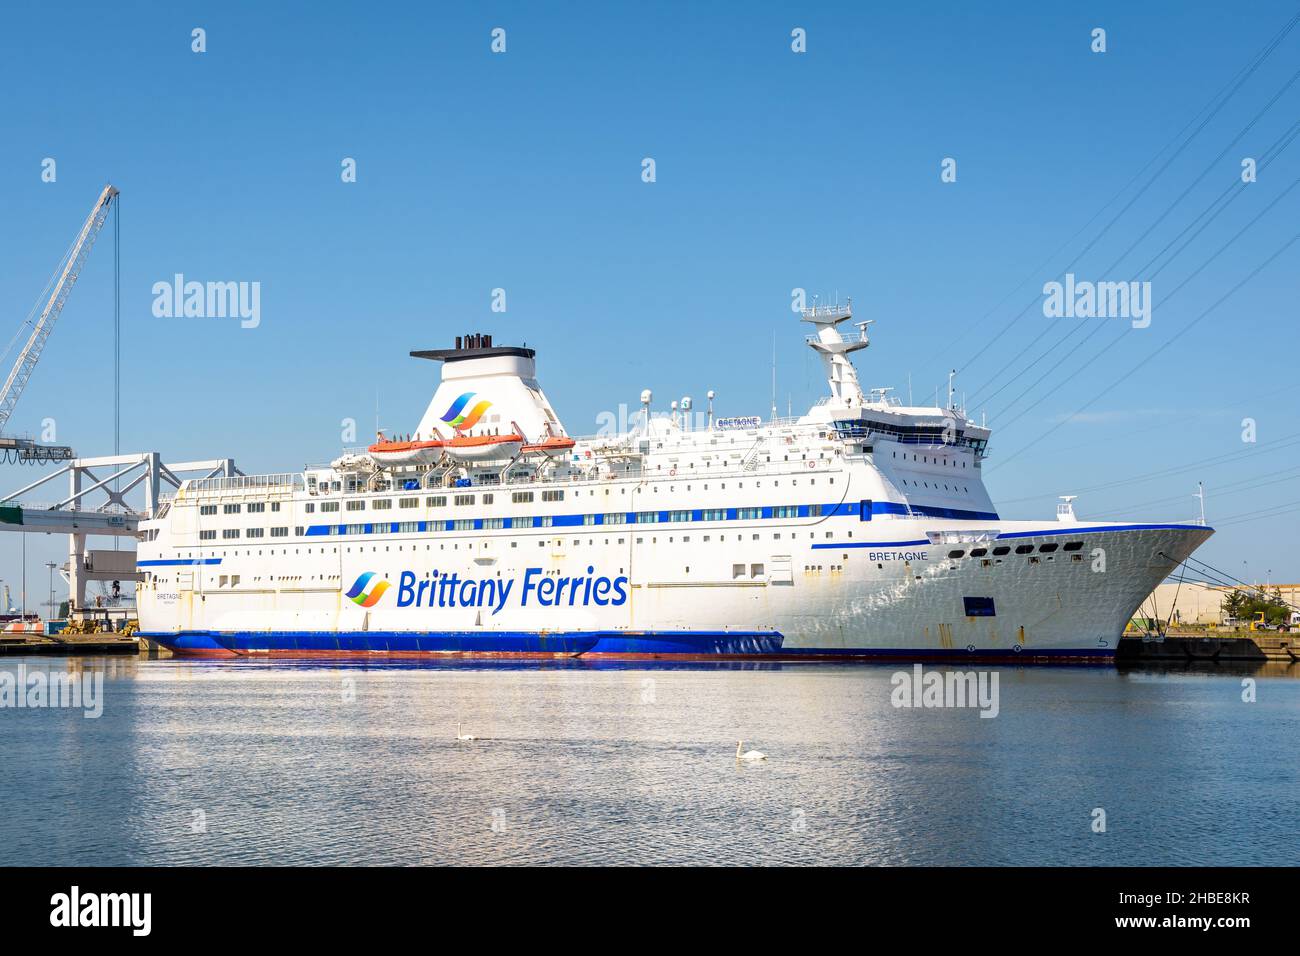 The ferry boat 'Bretagne' from the Brittany Ferries company moored in the port of Le Havre. Stock Photo